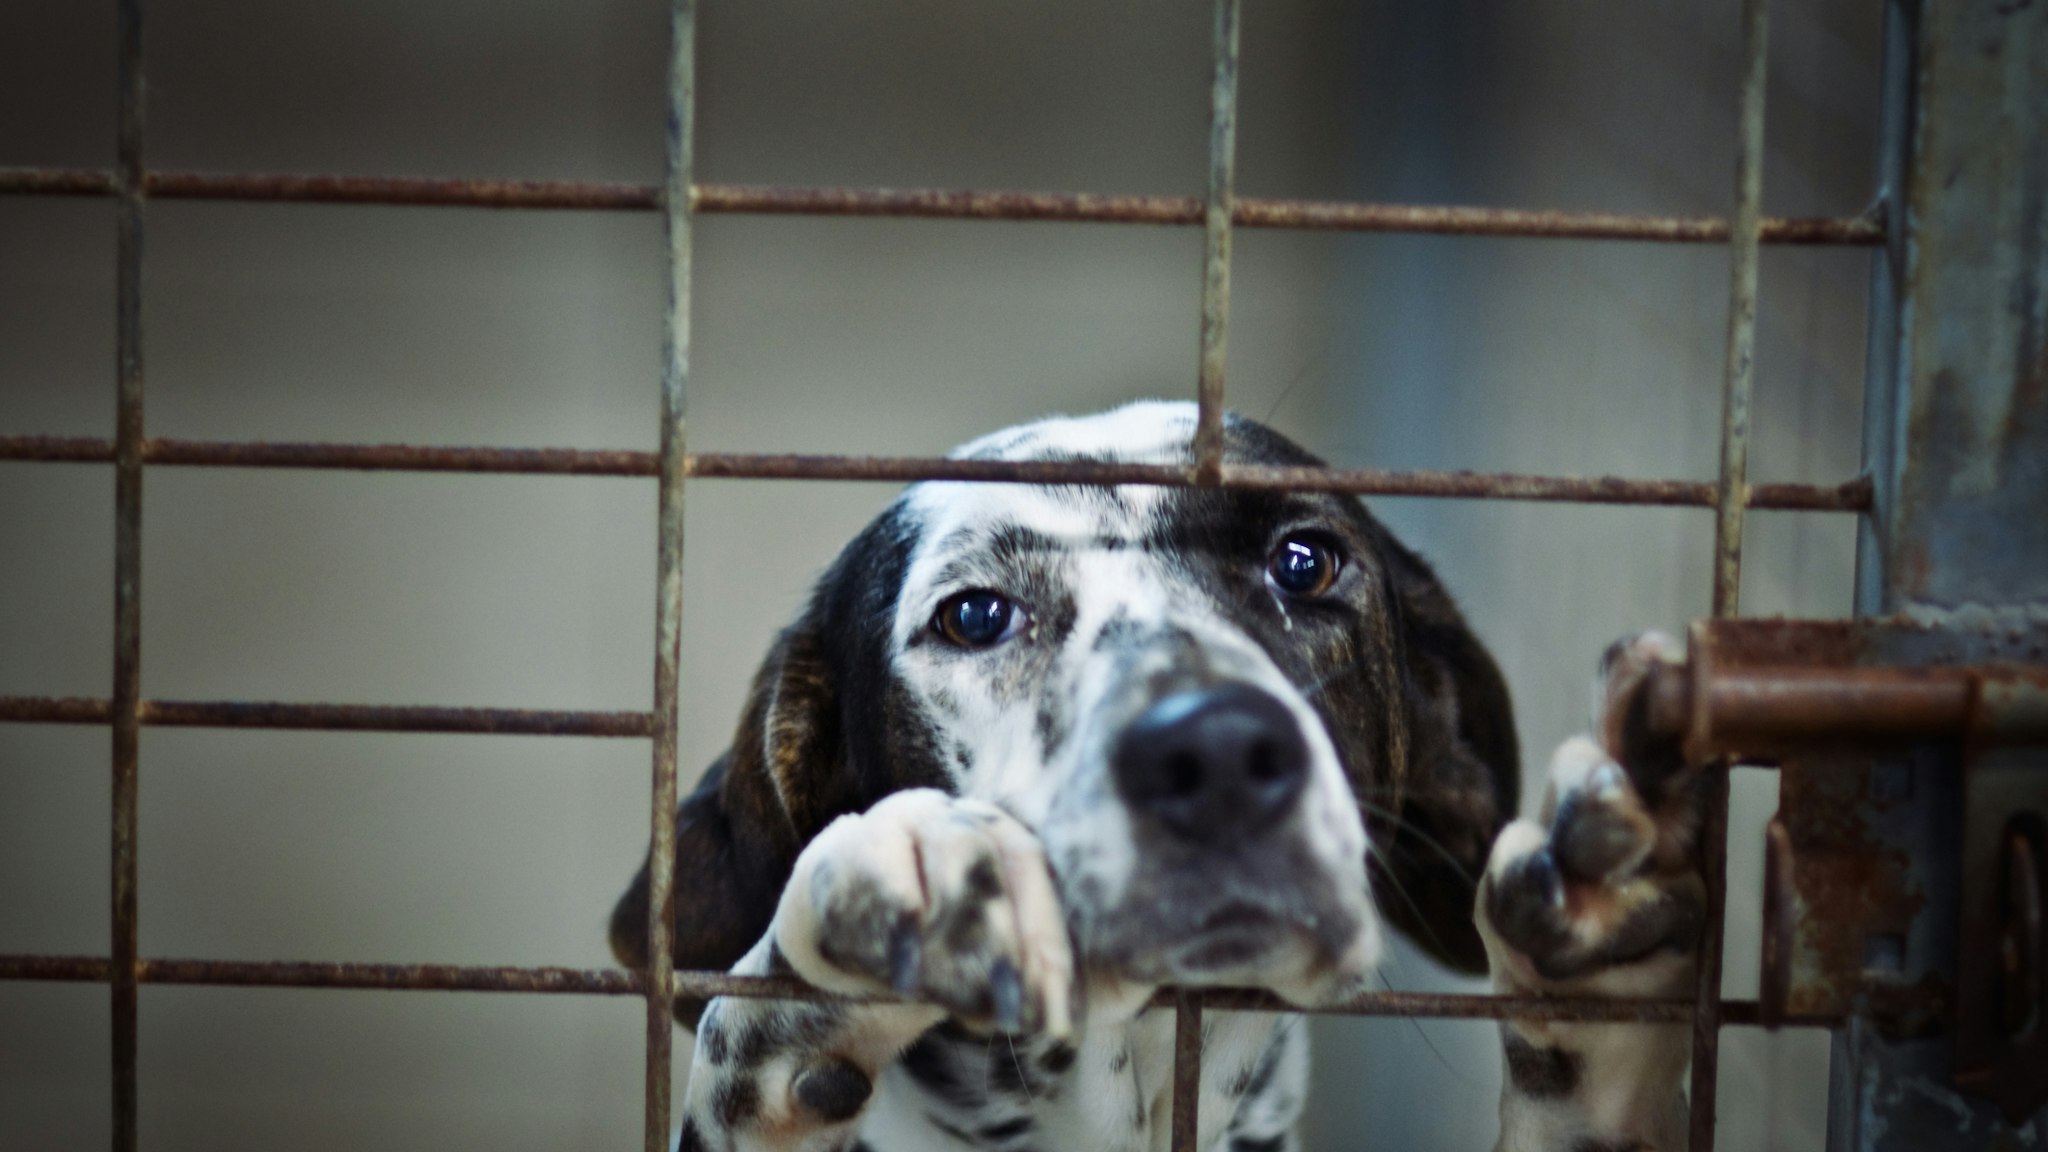 Dog Locked in Cage - stock photo